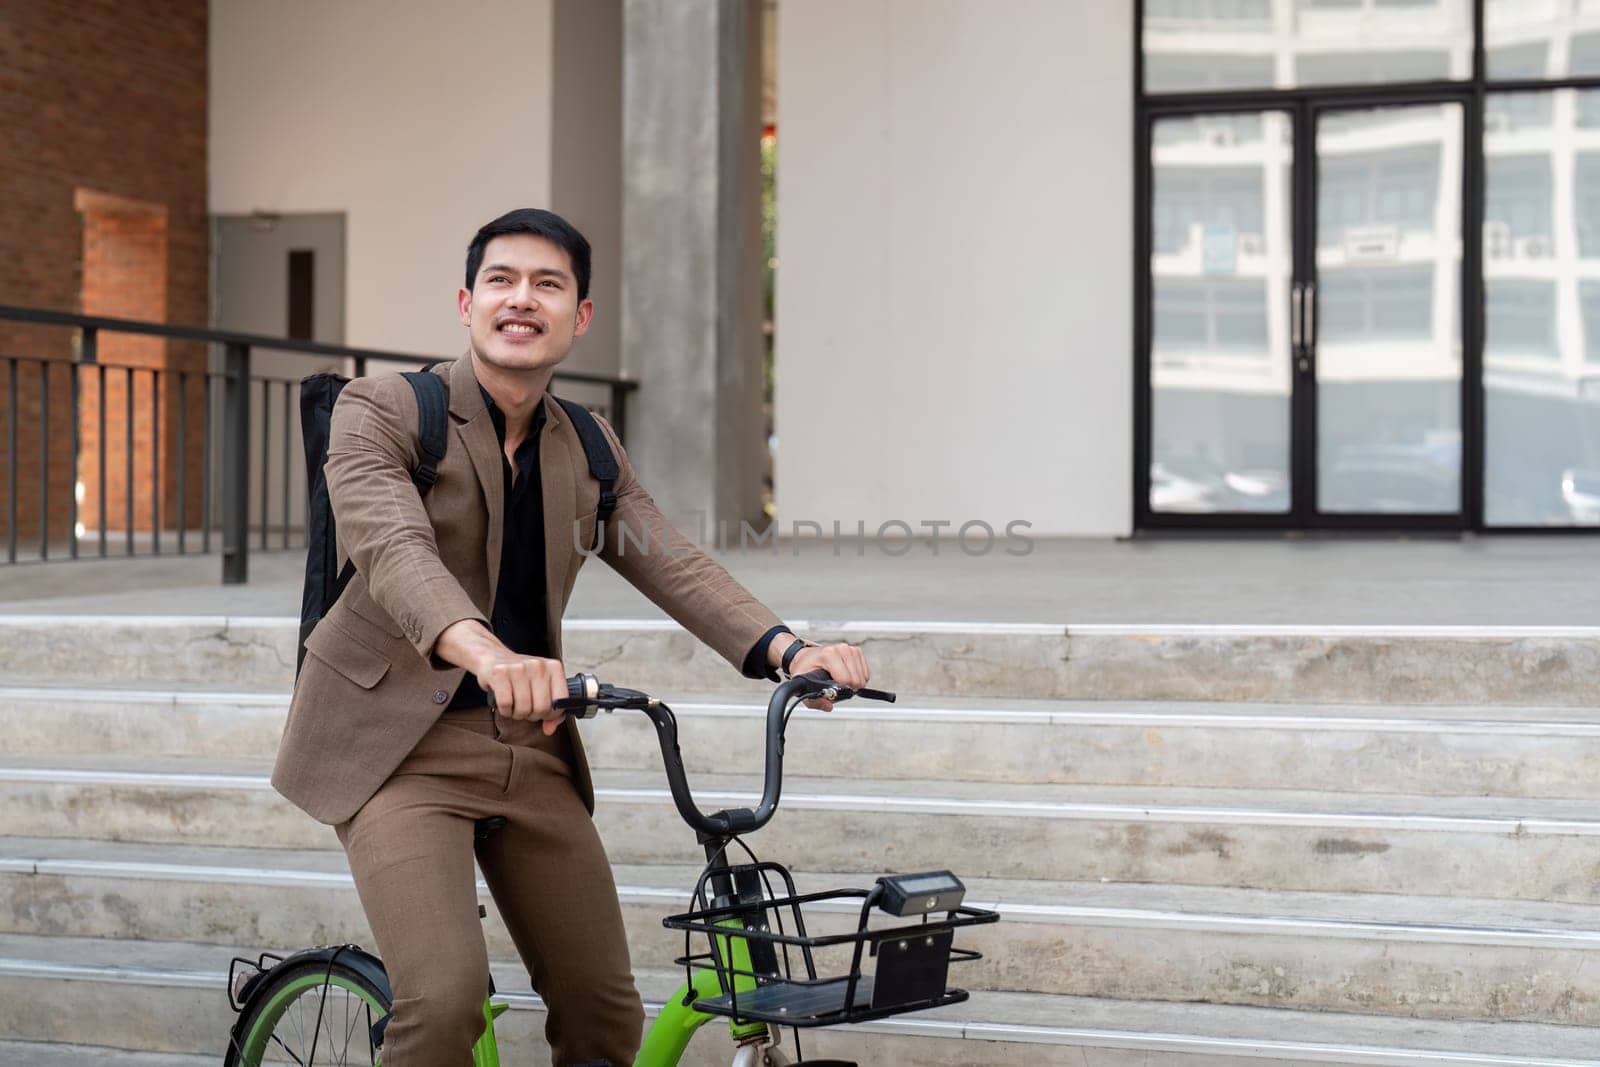 The businessman eco friendly transportation, cycling through the city avenues to go to work. sustainable lifestyle concept by nateemee